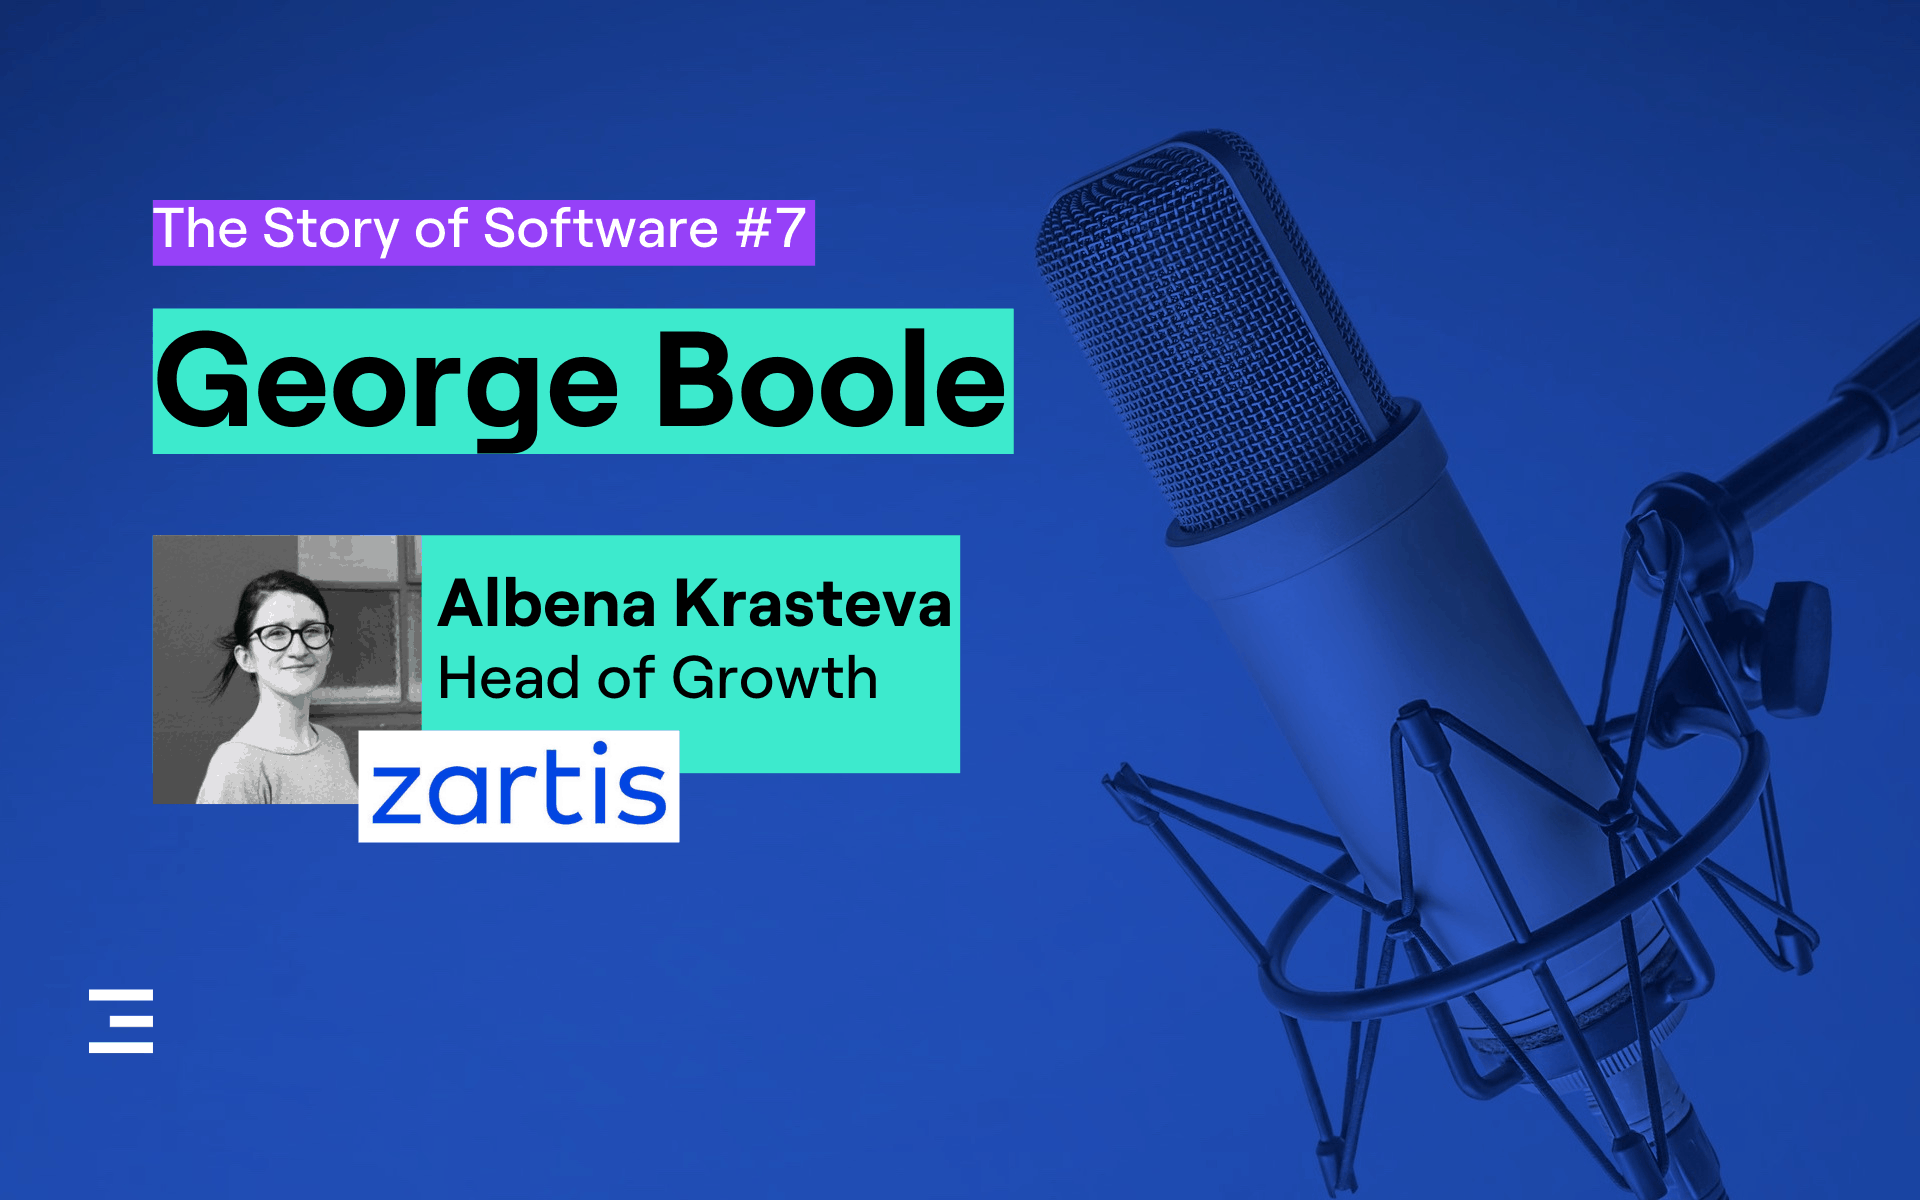 George Boole examined in the story of software podcast, episode 7